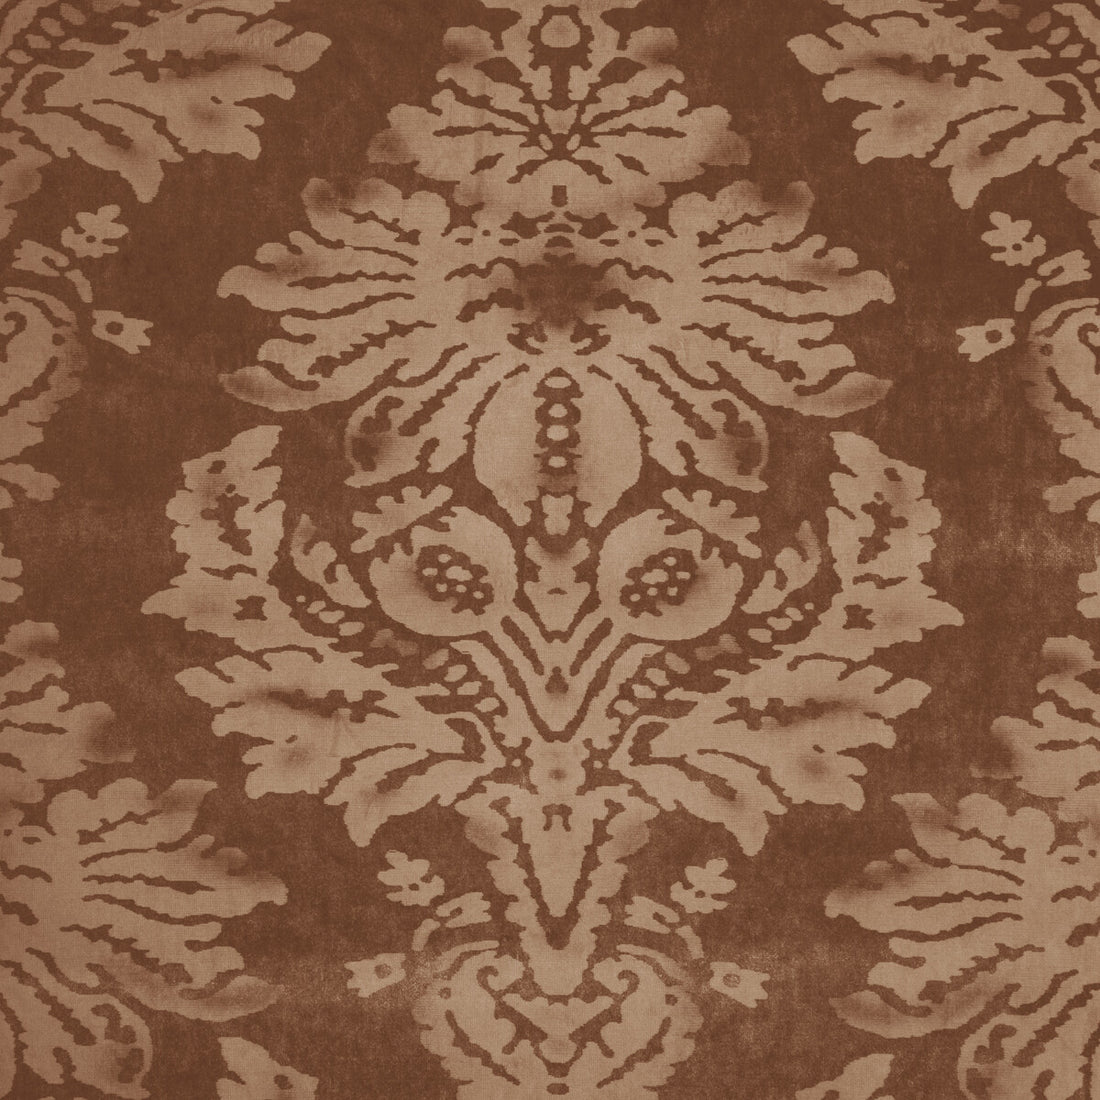 Parham Velvet fabric in bronze color - pattern 2023111.616.0 - by Lee Jofa in the Barwick Velvets collection